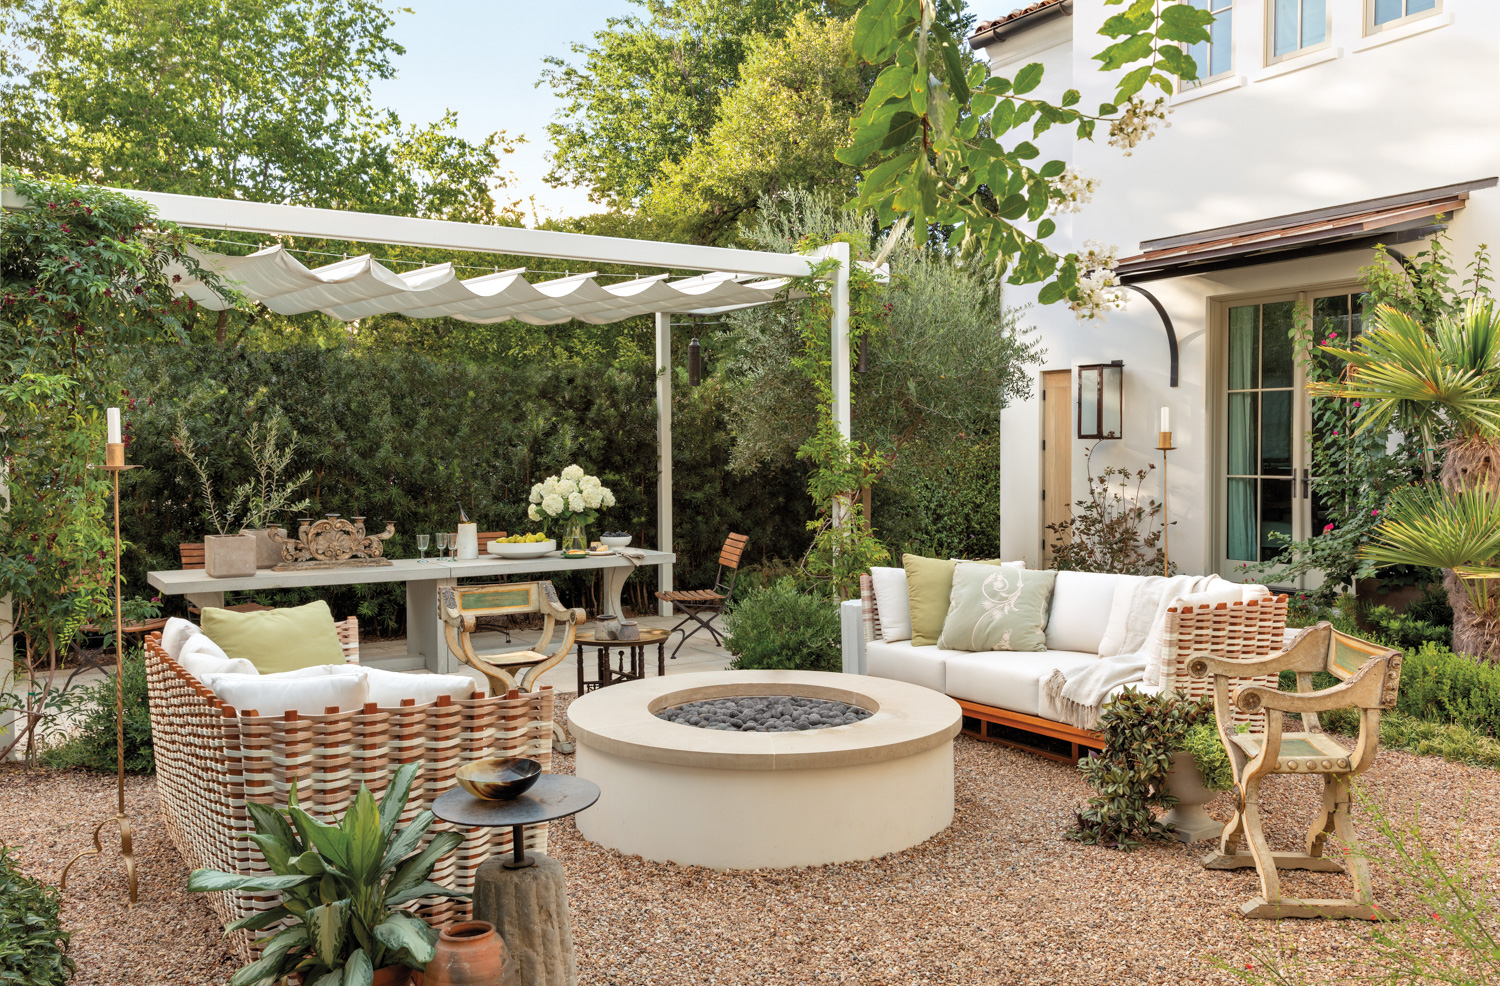 courtyard with a fire pit seating area and covered dining area serve as garden inspiration